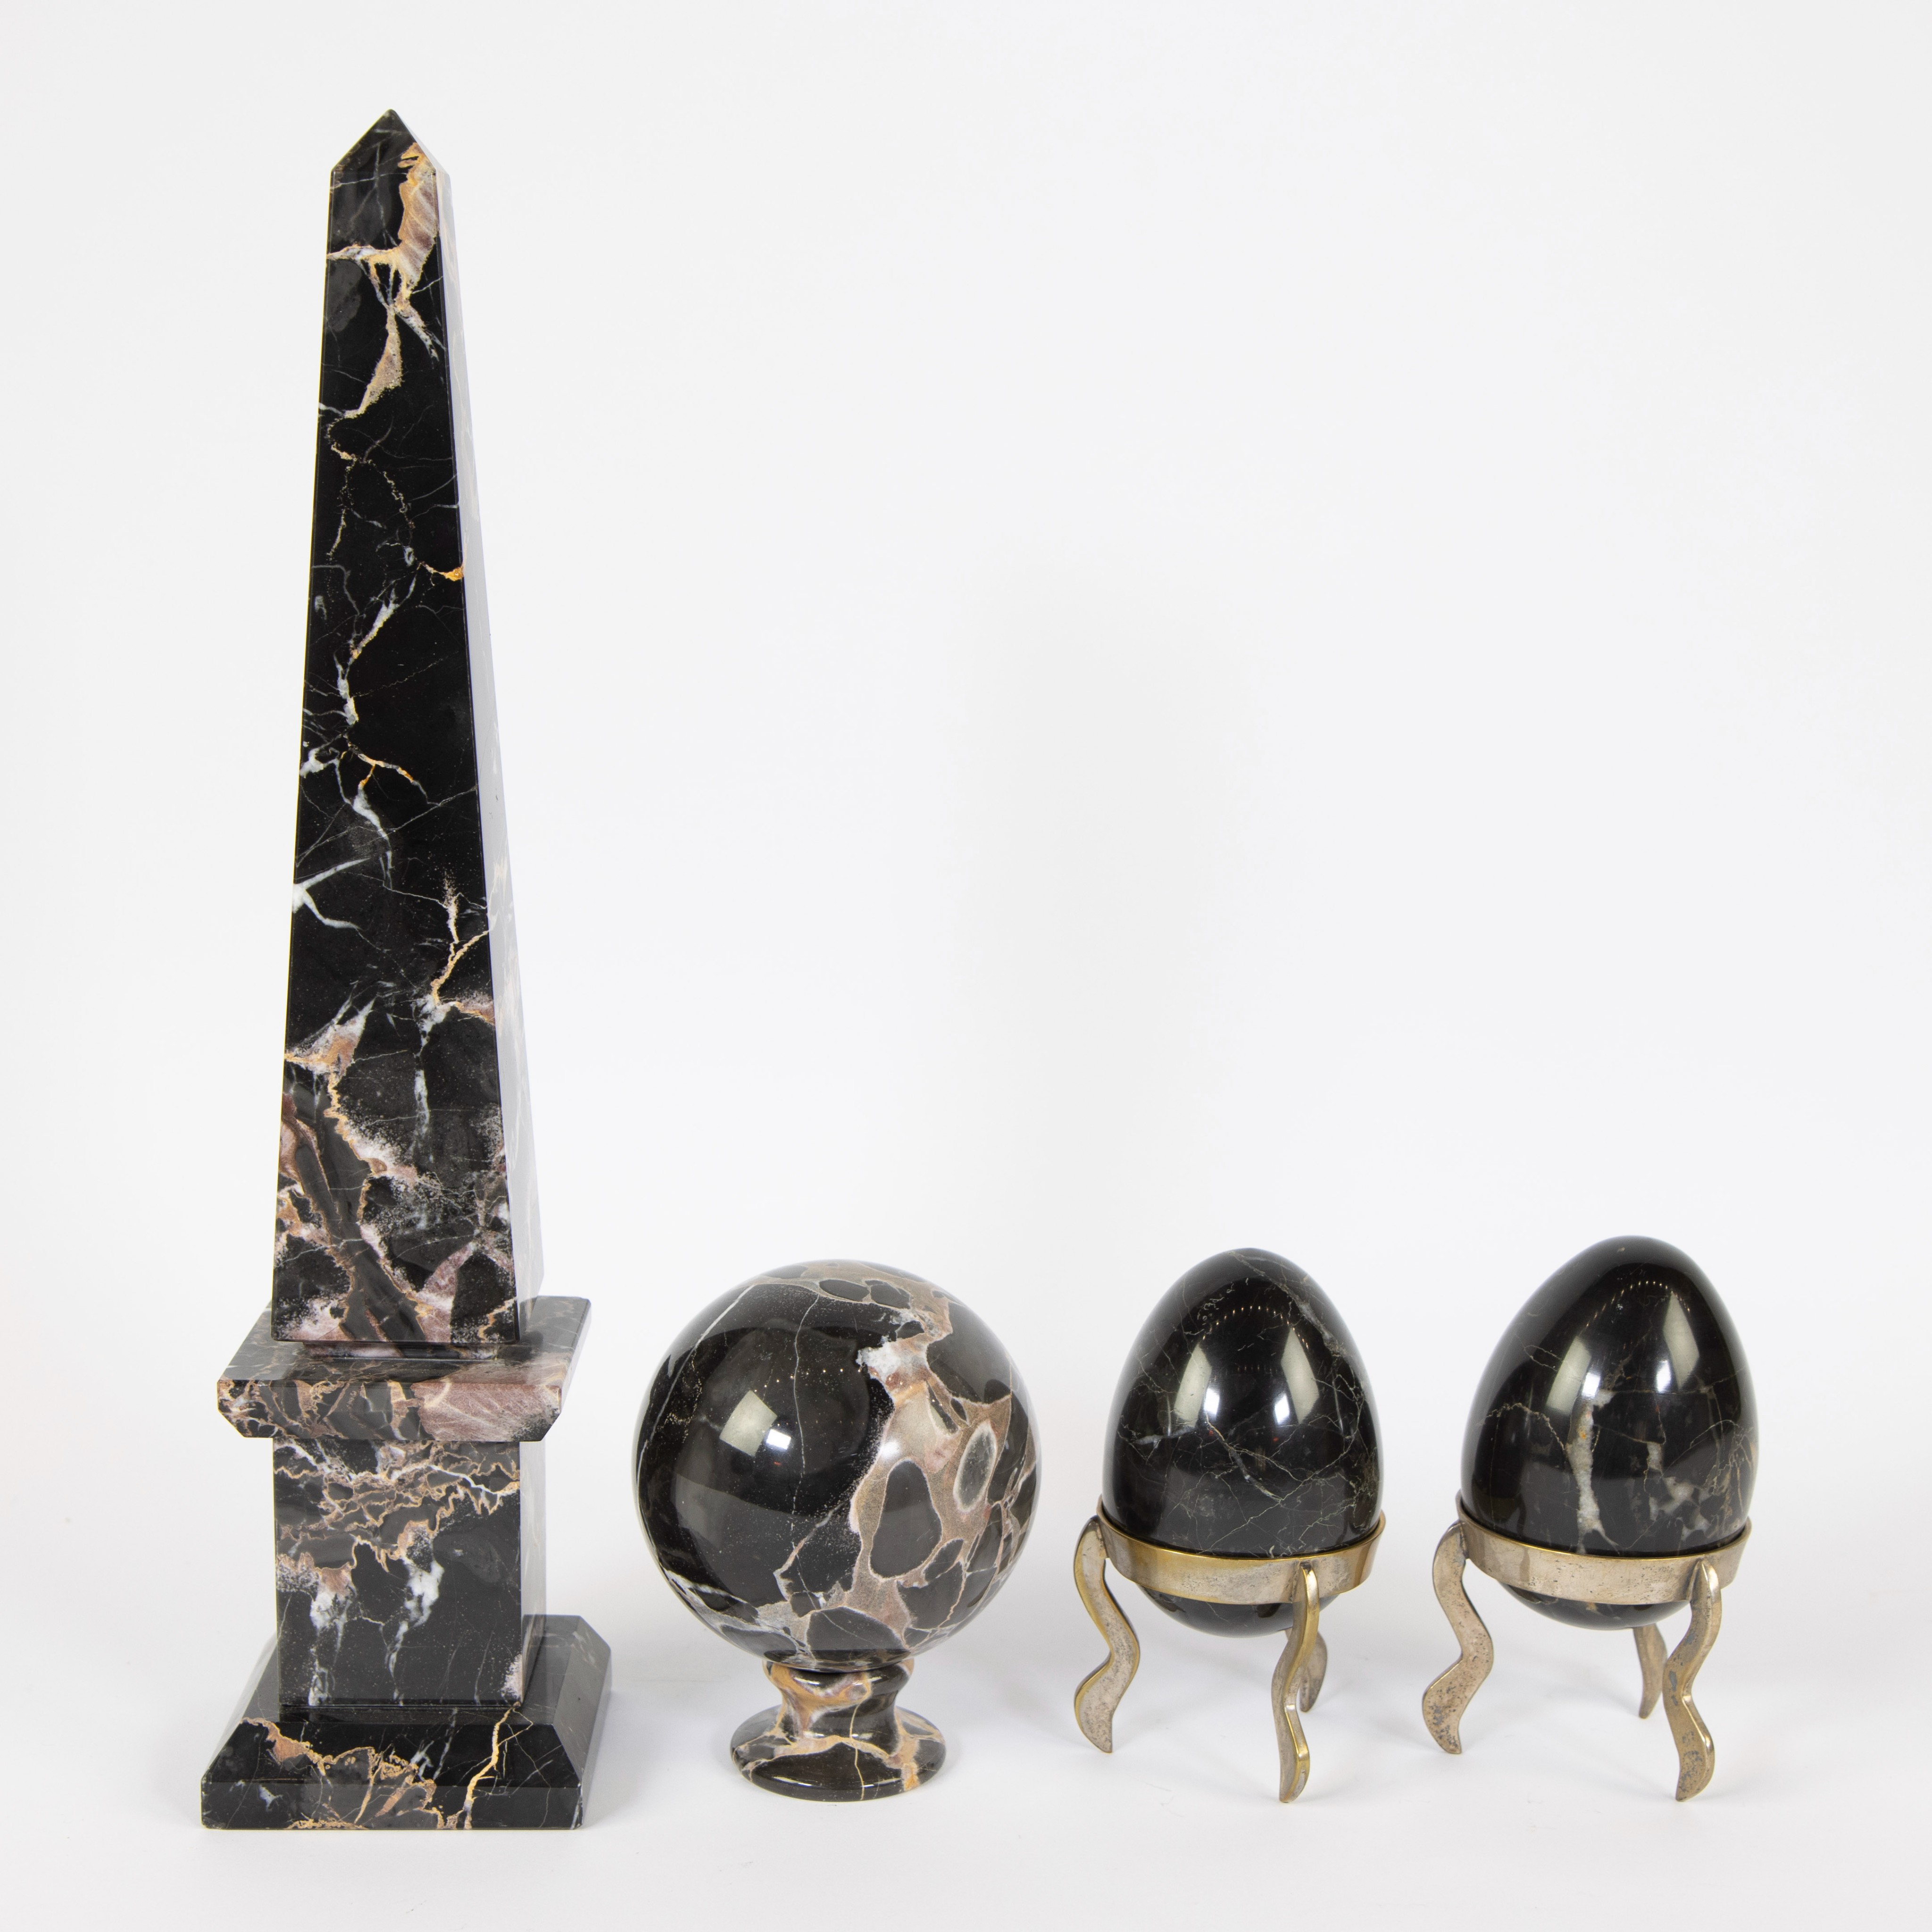 Lot of 4 marble ornamental objects, obilisk, round ball on foot and 2 eggs on silver plated foot - Image 3 of 4